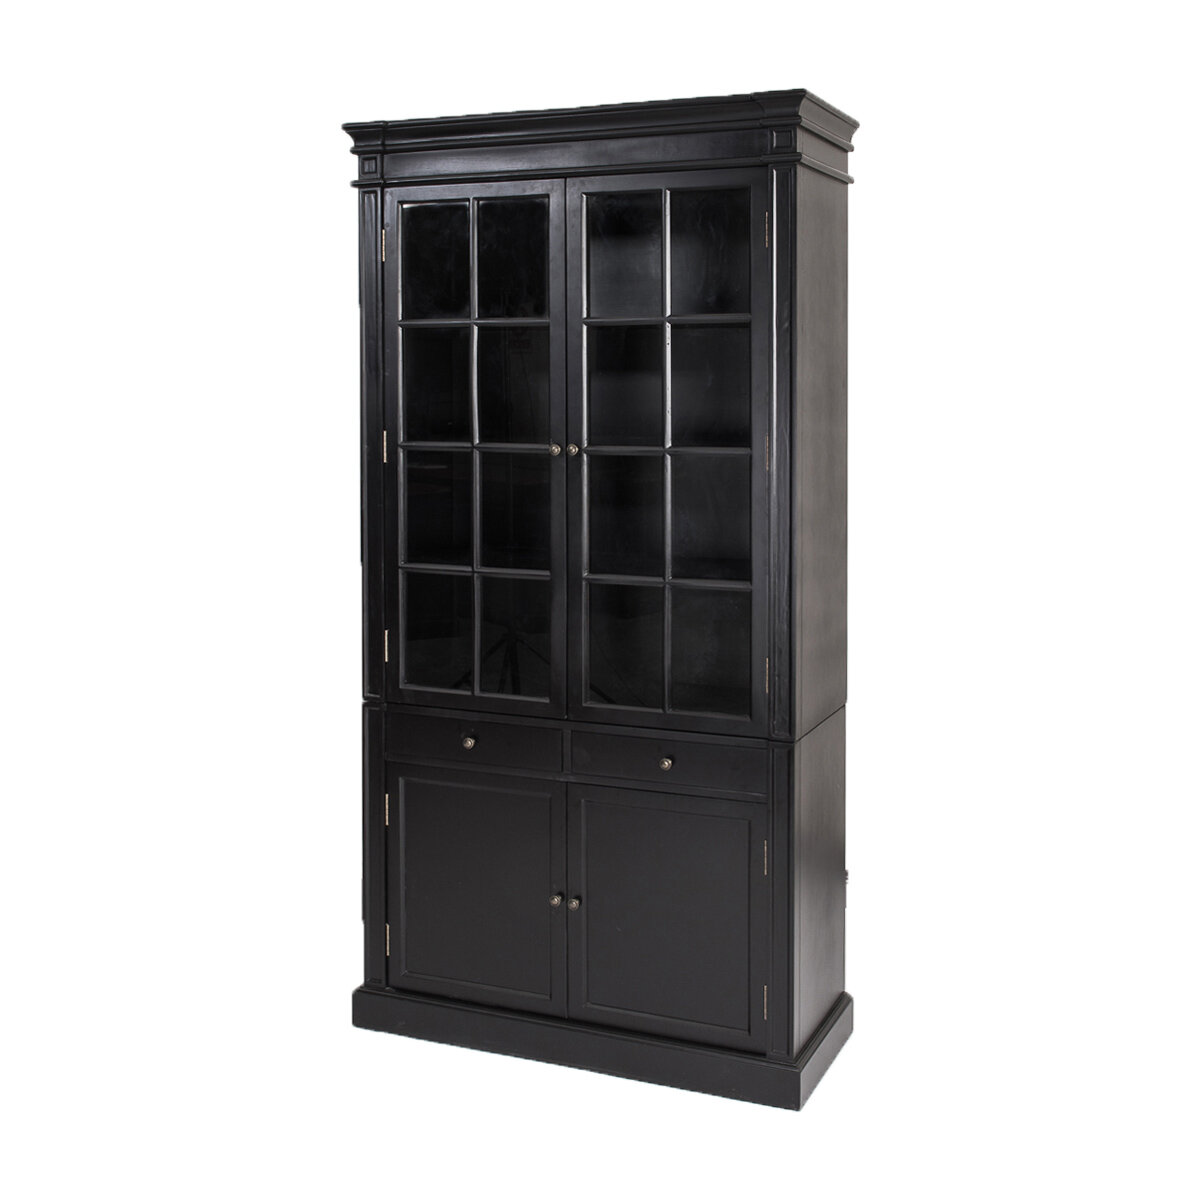 French Provincial Furniture Glass Door Bookcase Cabinet Black Ebay